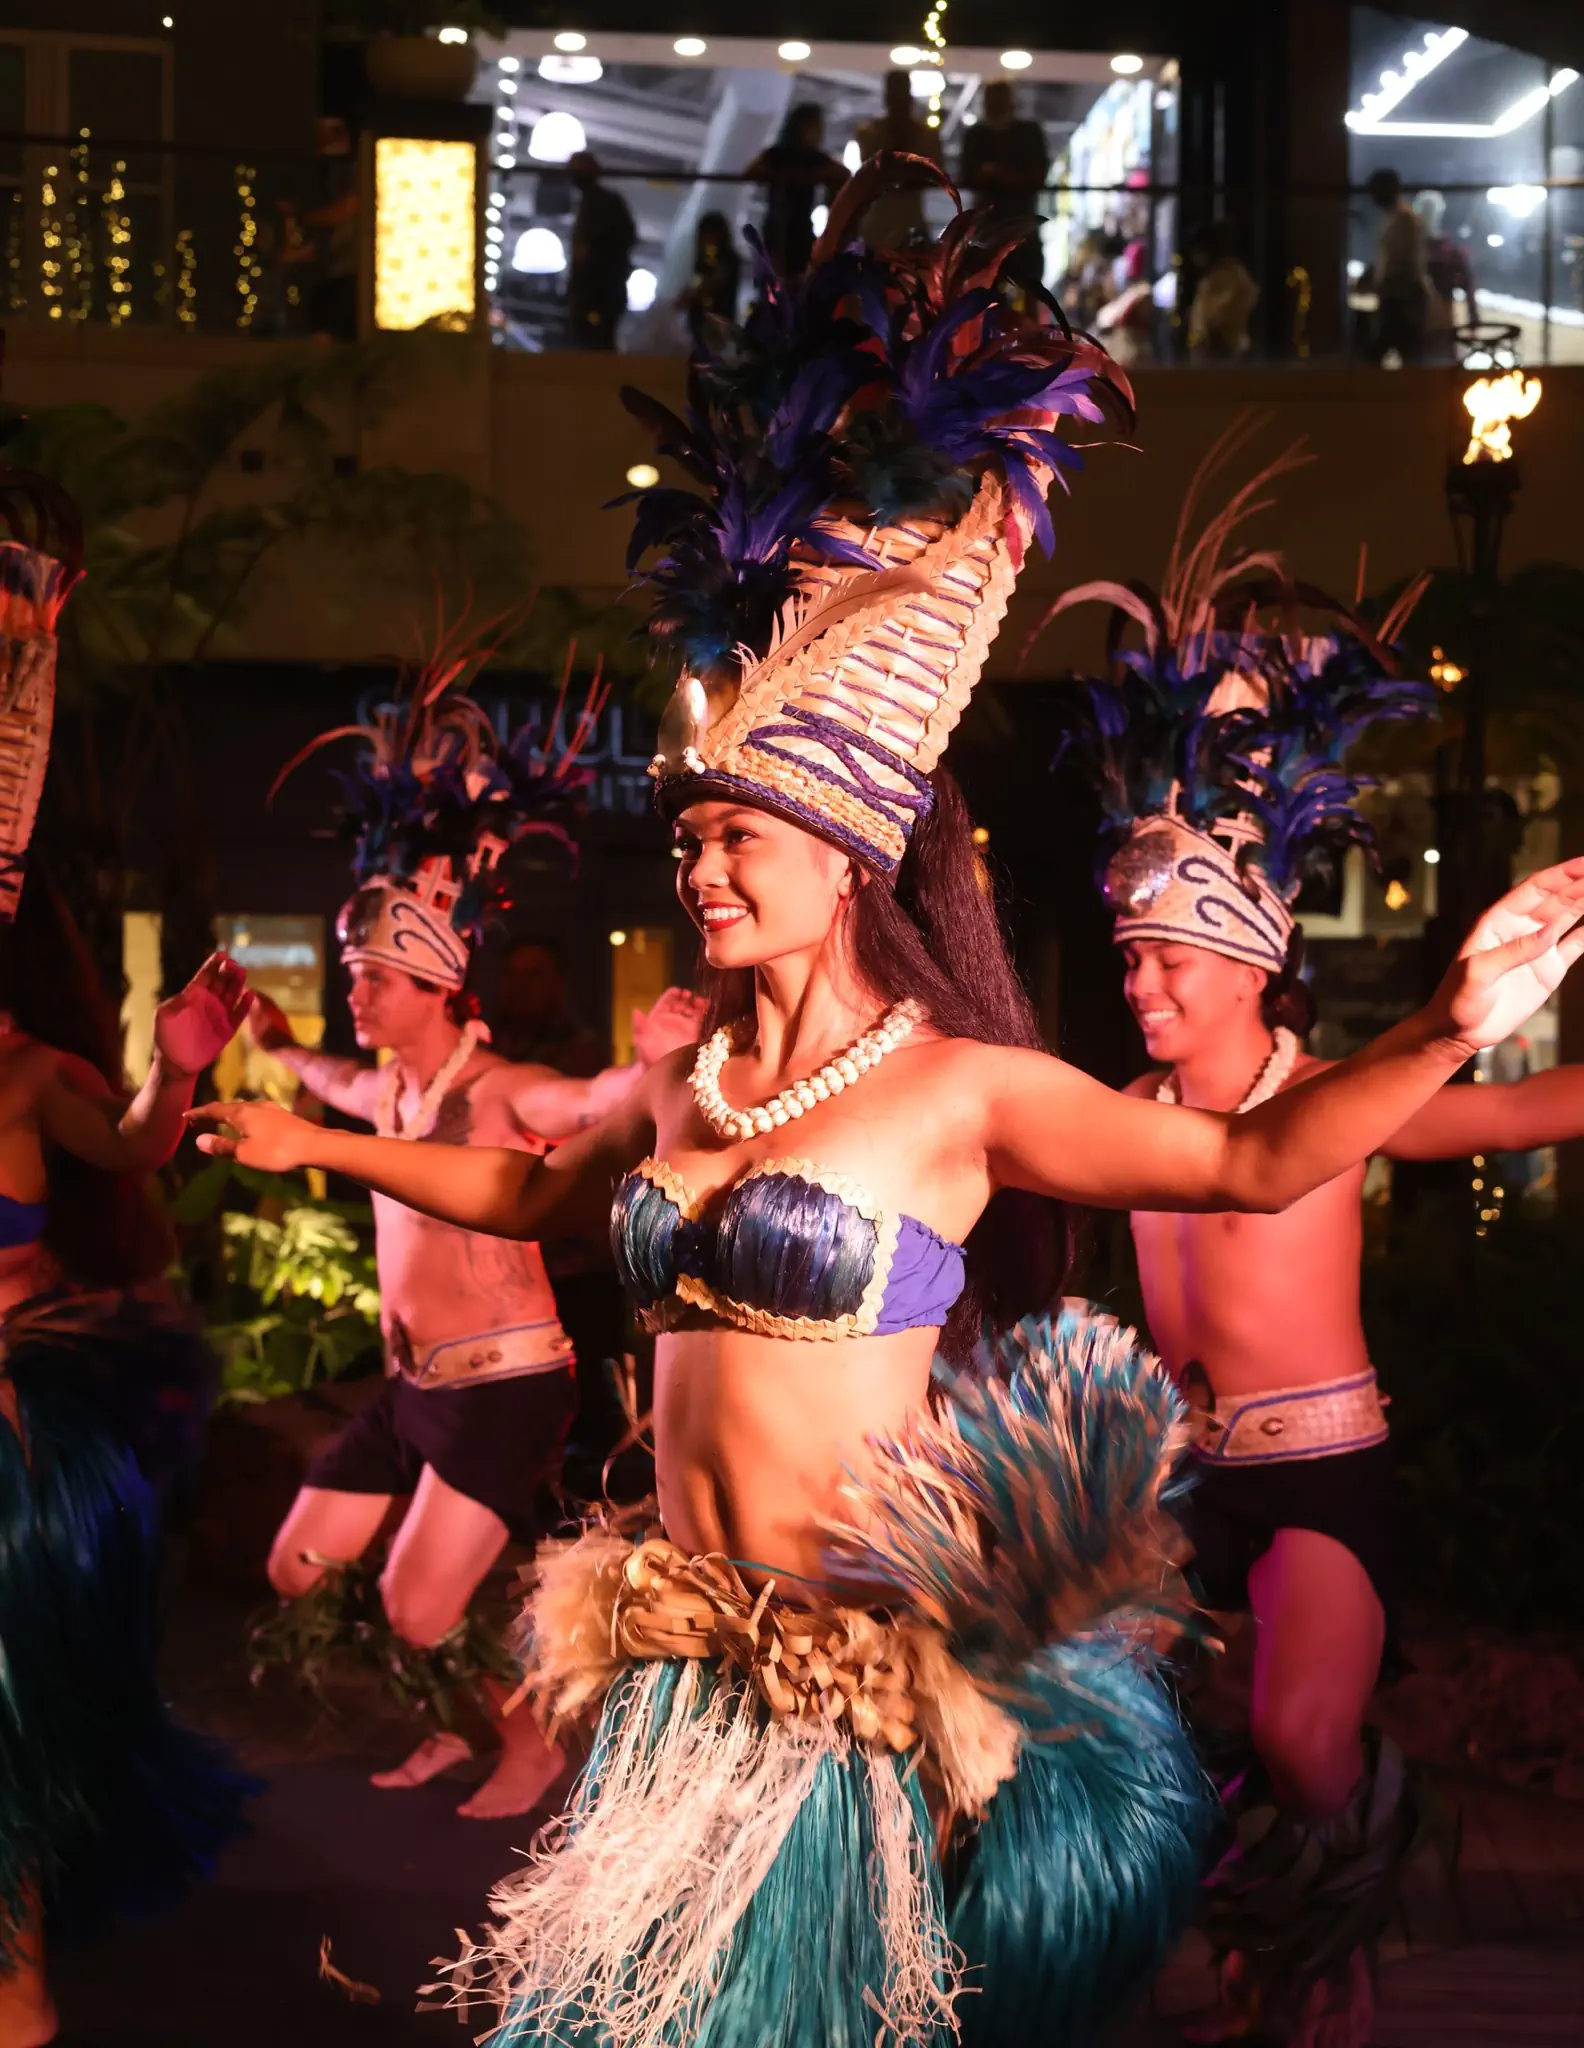 Queens Waikiki Luau is a Cultural Activity located in the city of Honolulu on Oahu, Hawaii